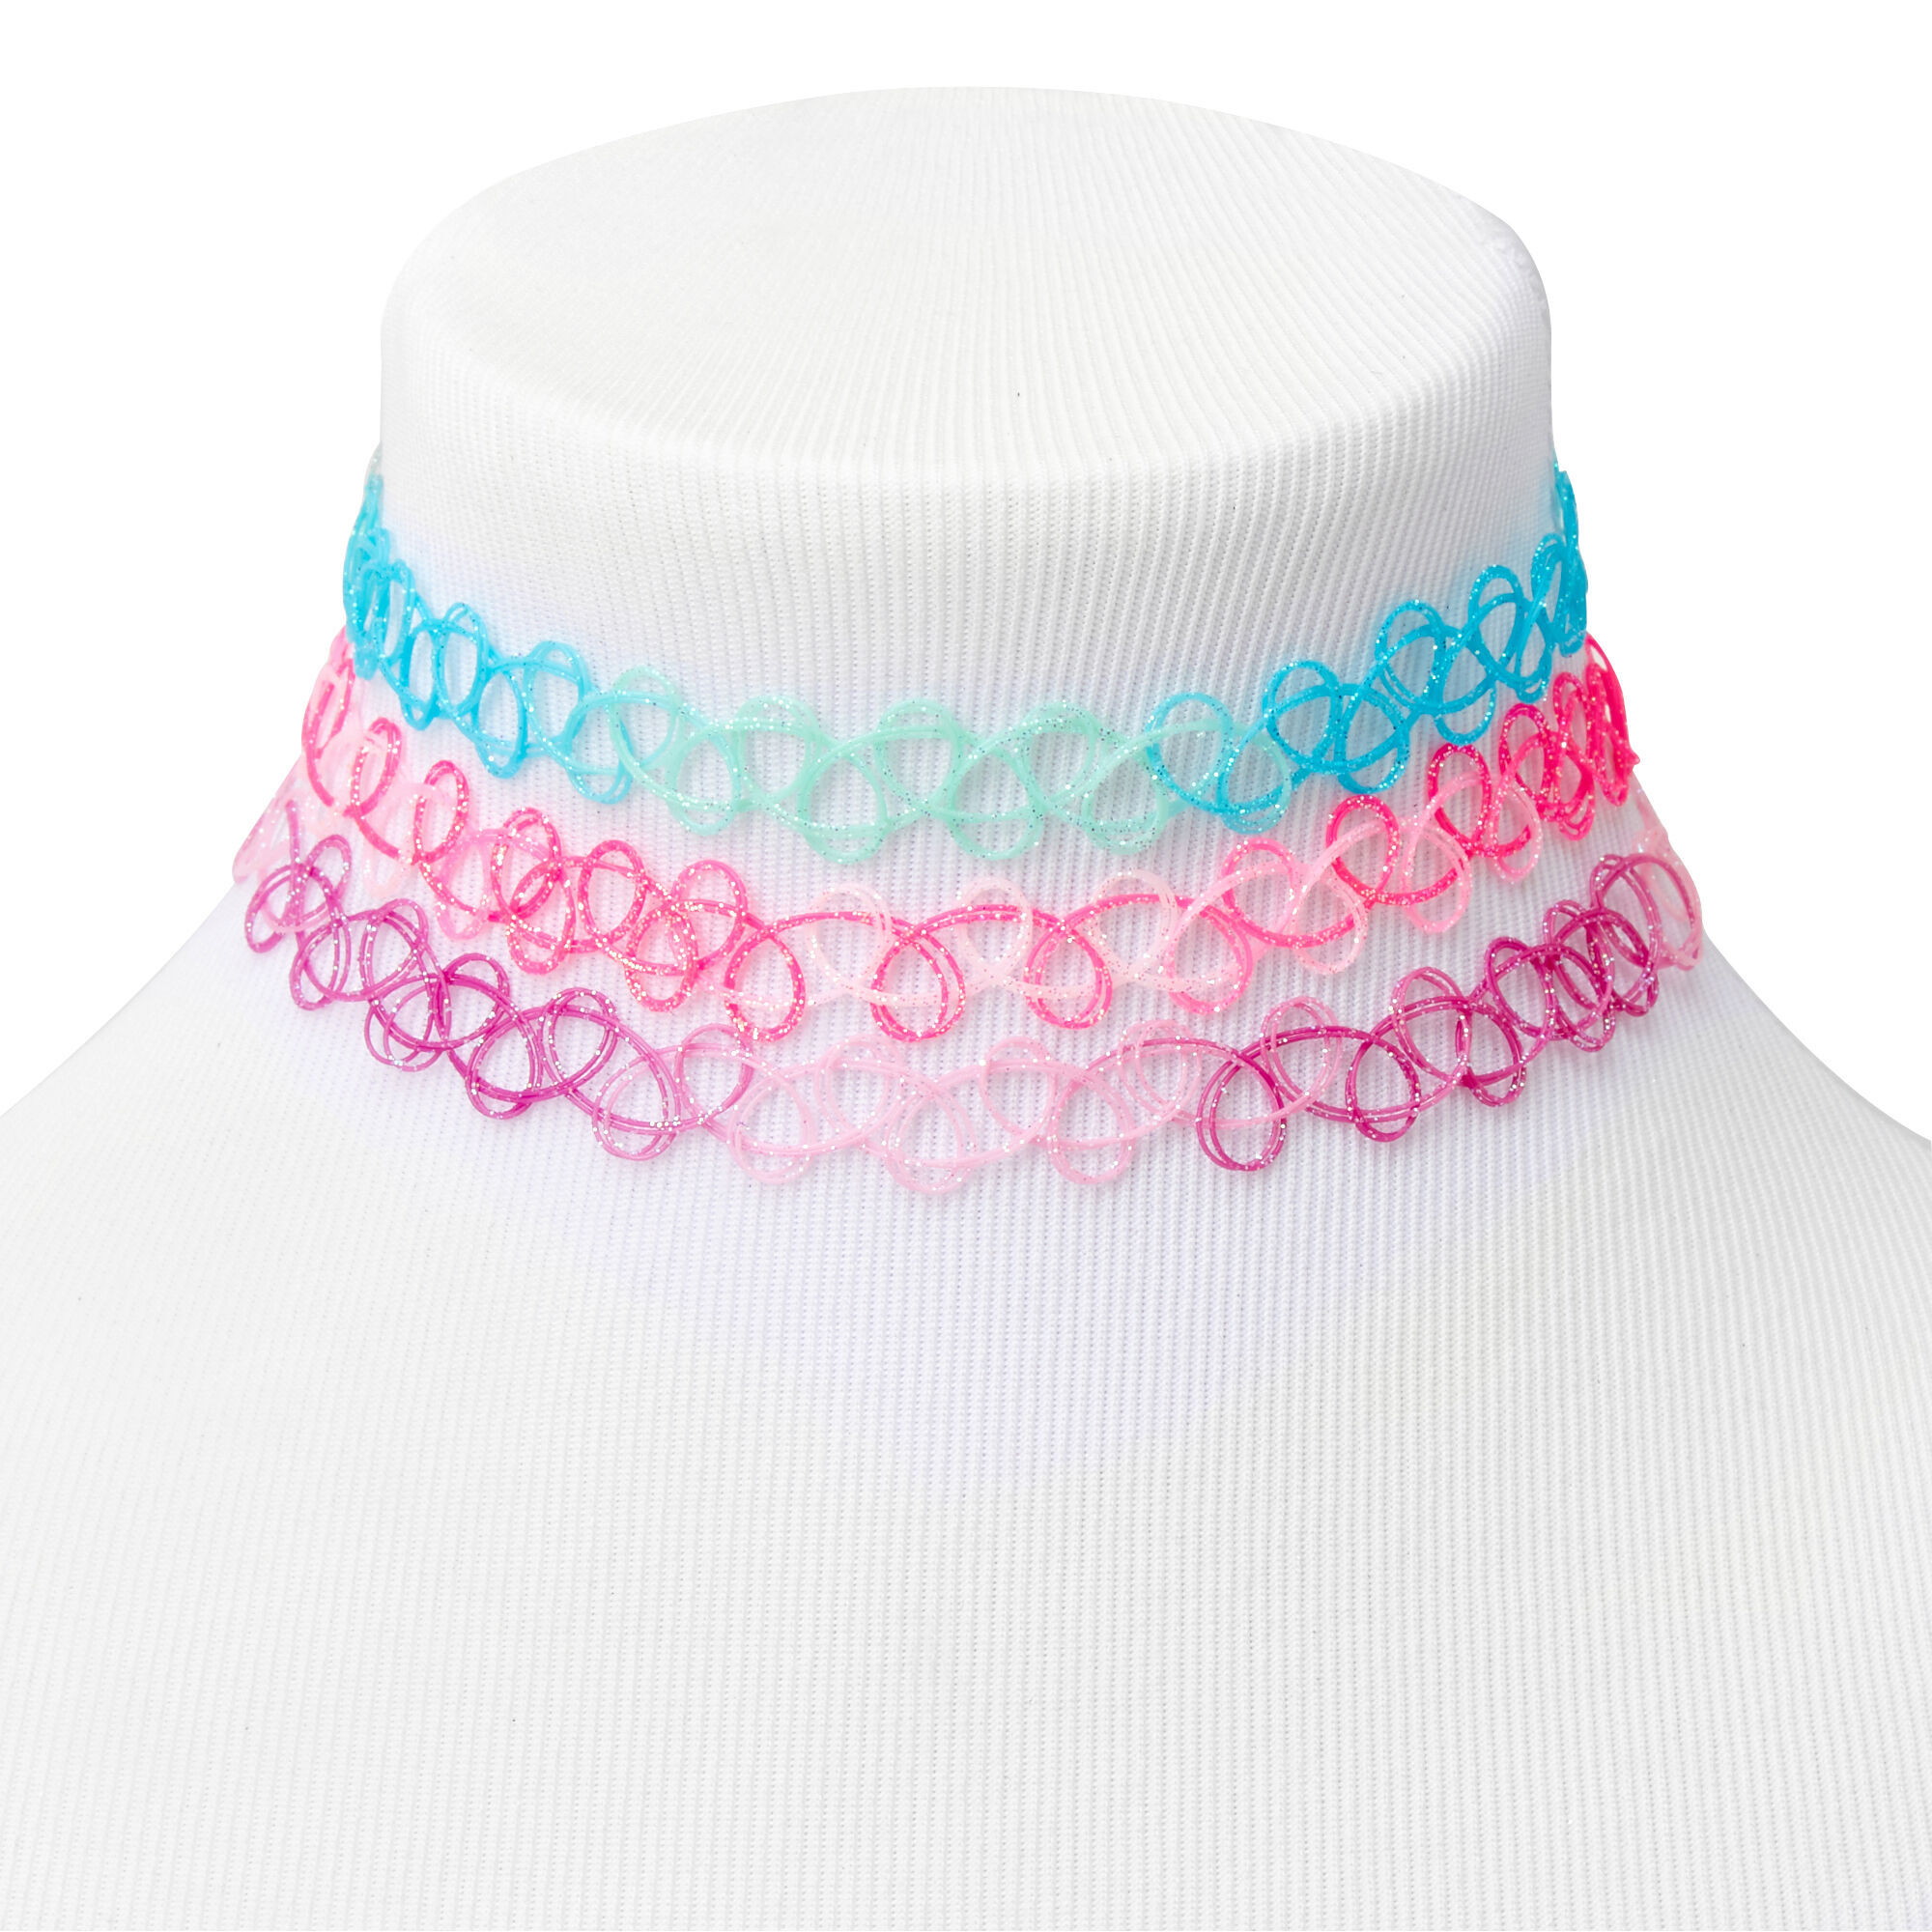 View Claires Pastel Glitter Tattoo Choker Necklaces 3 Pack information